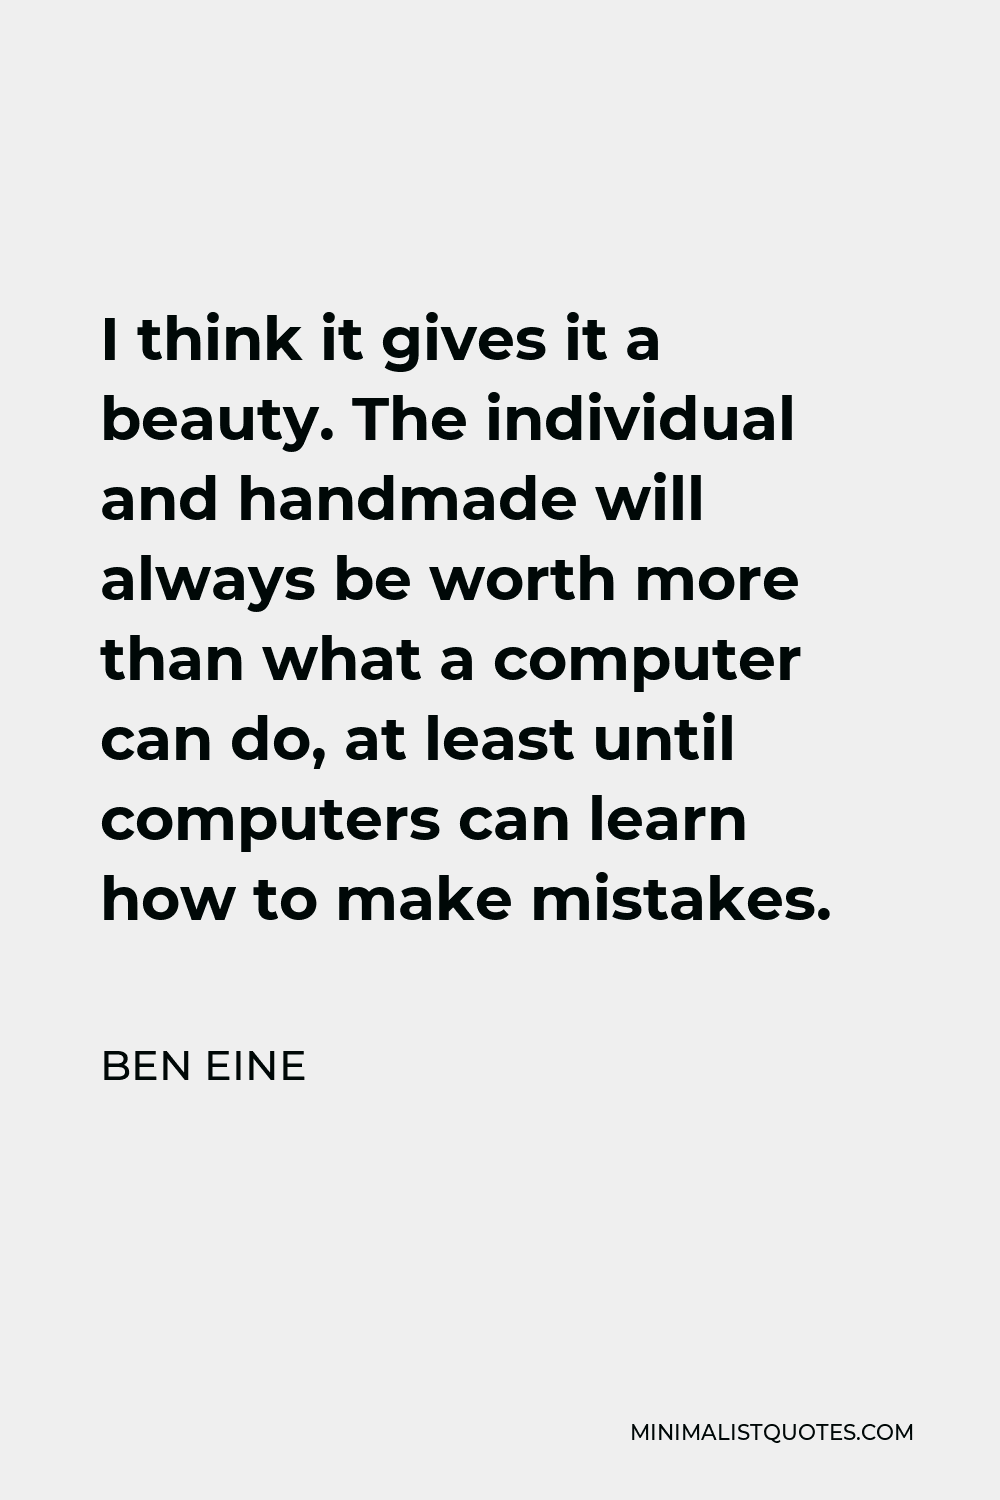 Ben Eine Quote - I think it gives it a beauty. The individual and handmade will always be worth more than what a computer can do, at least until computers can learn how to make mistakes.